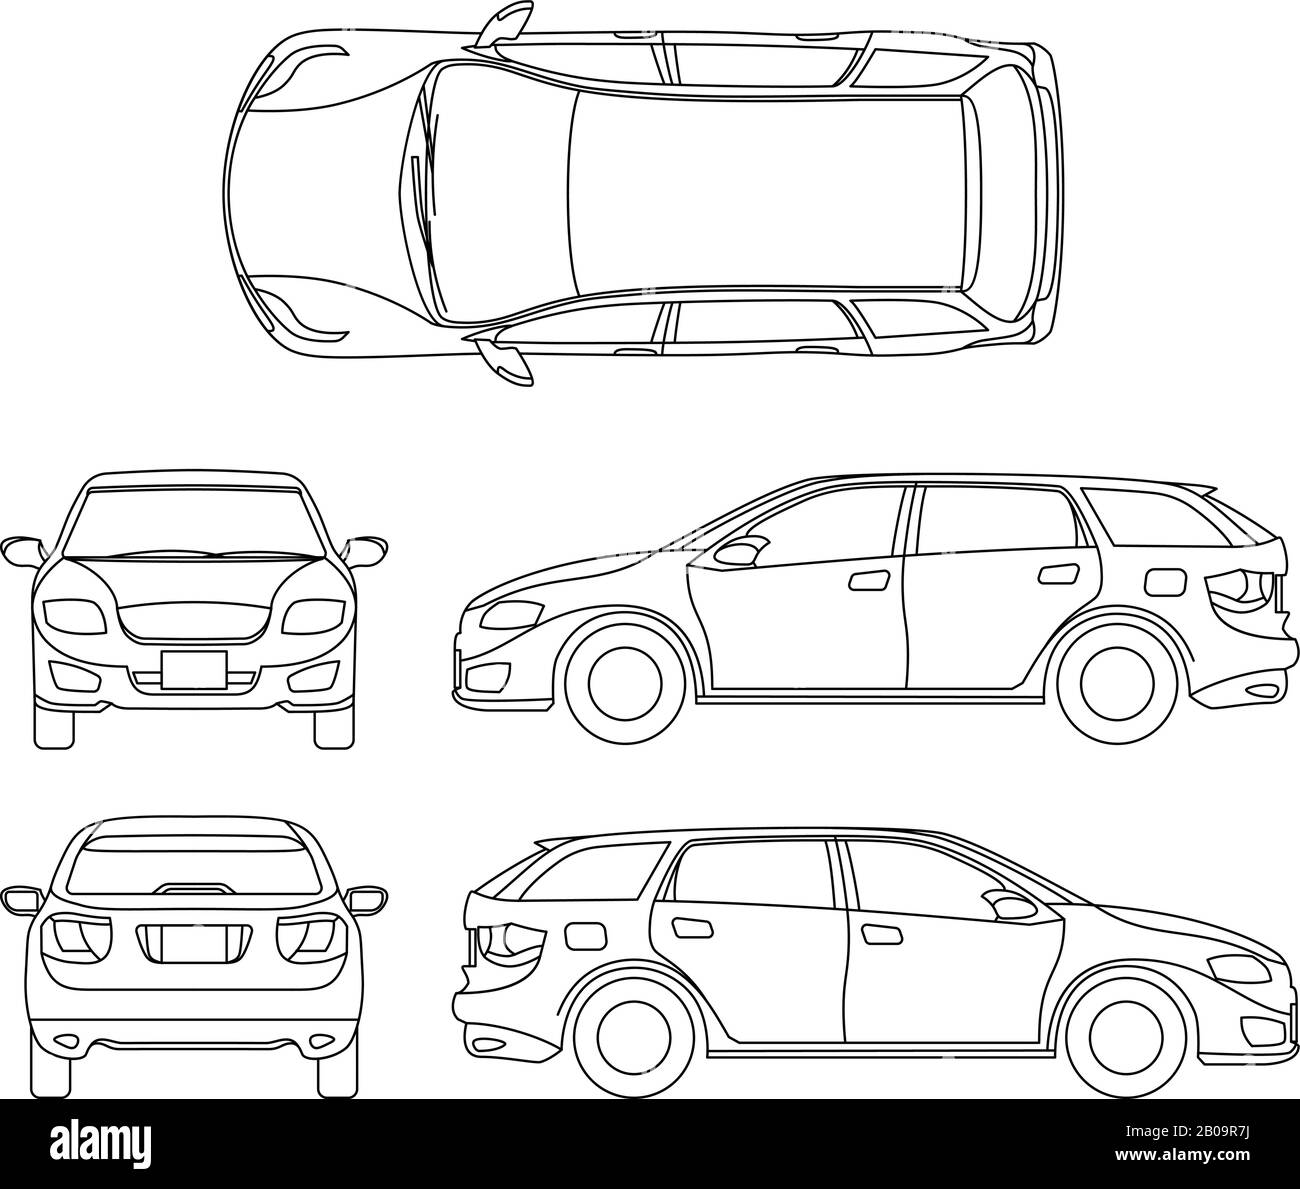 Line drawing of car white vehicle, vector computer art. Model of car, sketchy graphic transport car illustration Stock Vector